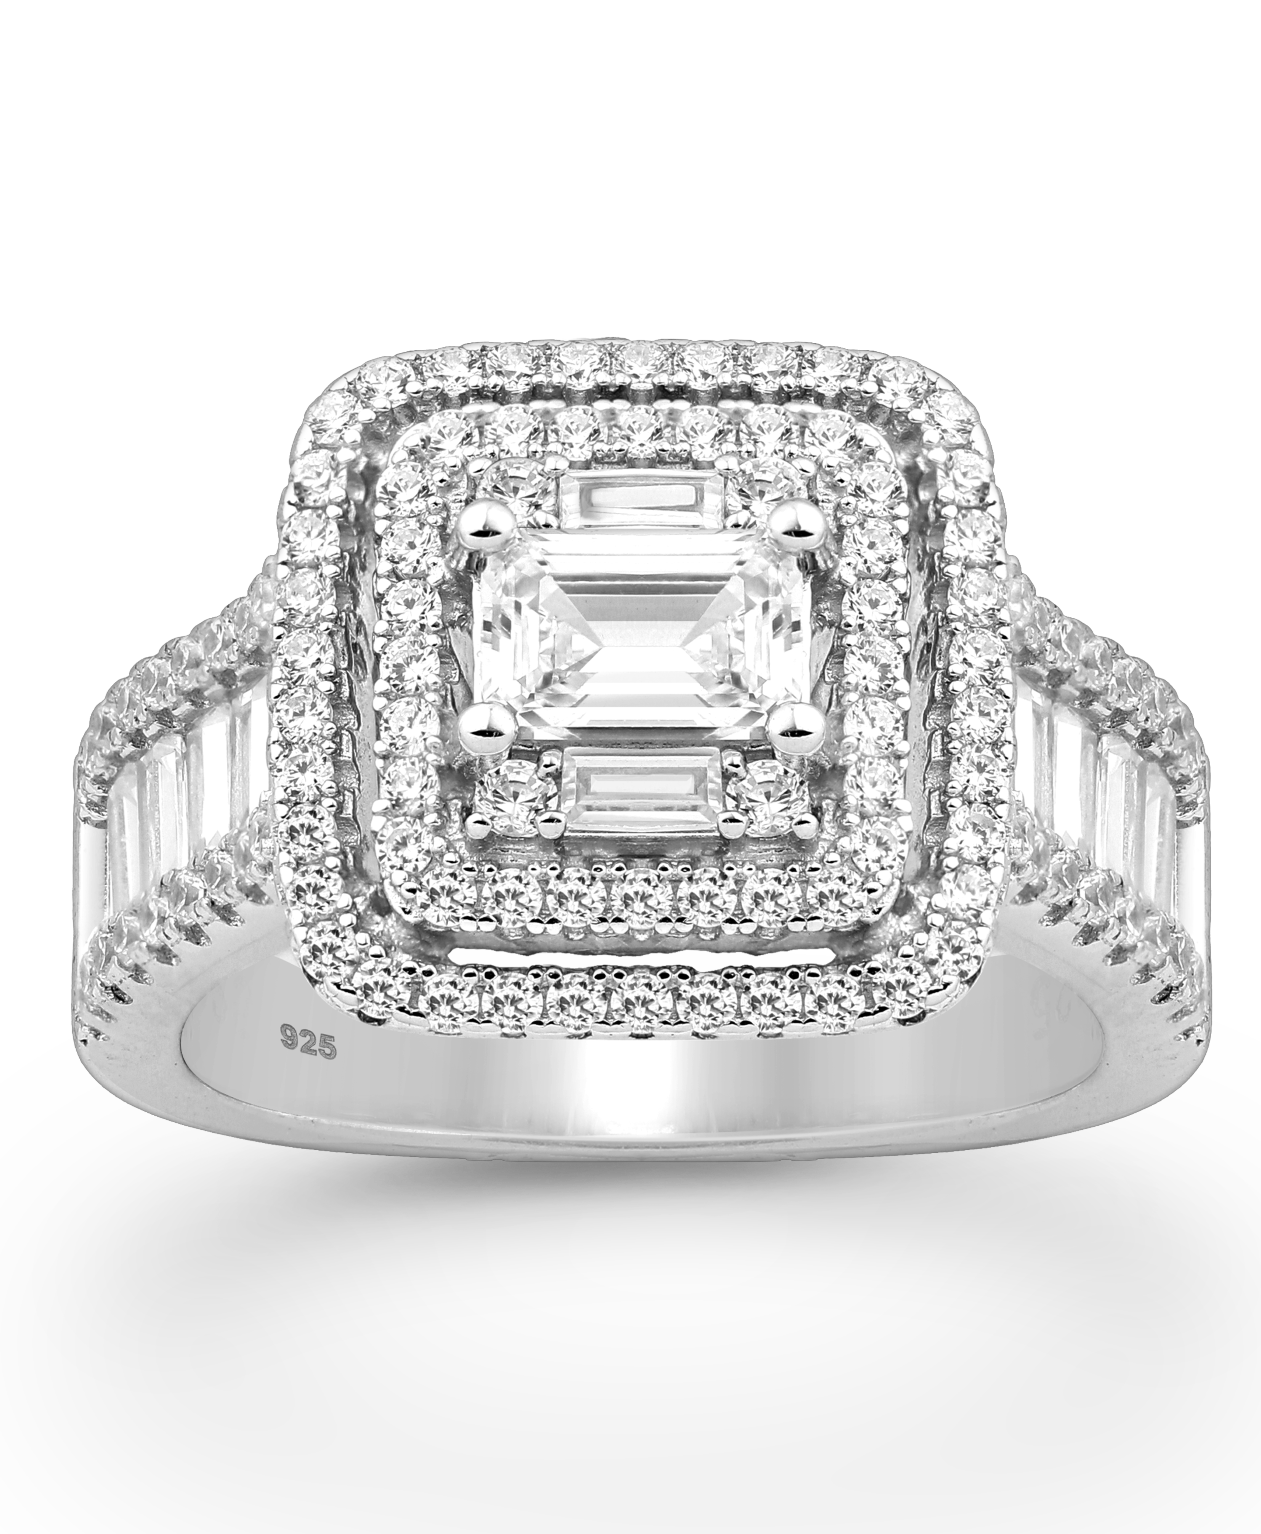 Statement Sterling Silver Ring with CZ Simulated Diamonds